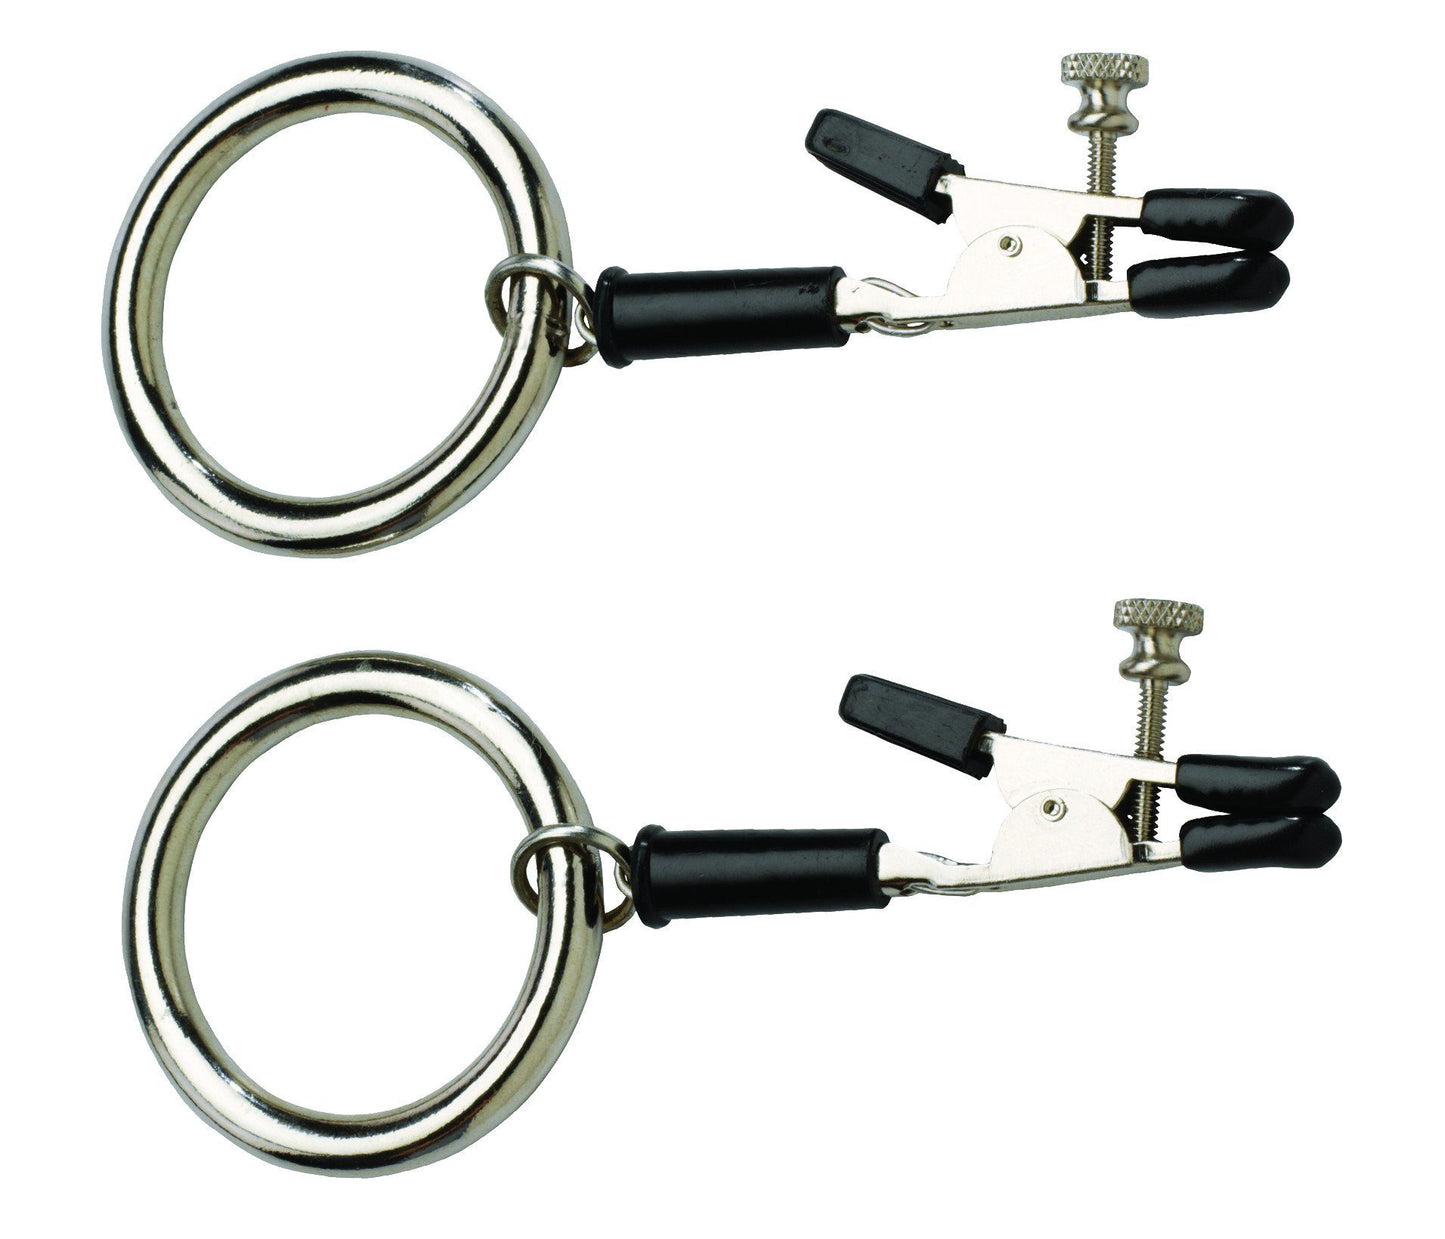 Nipple Clamps With Large Metal Ring by Spartacus